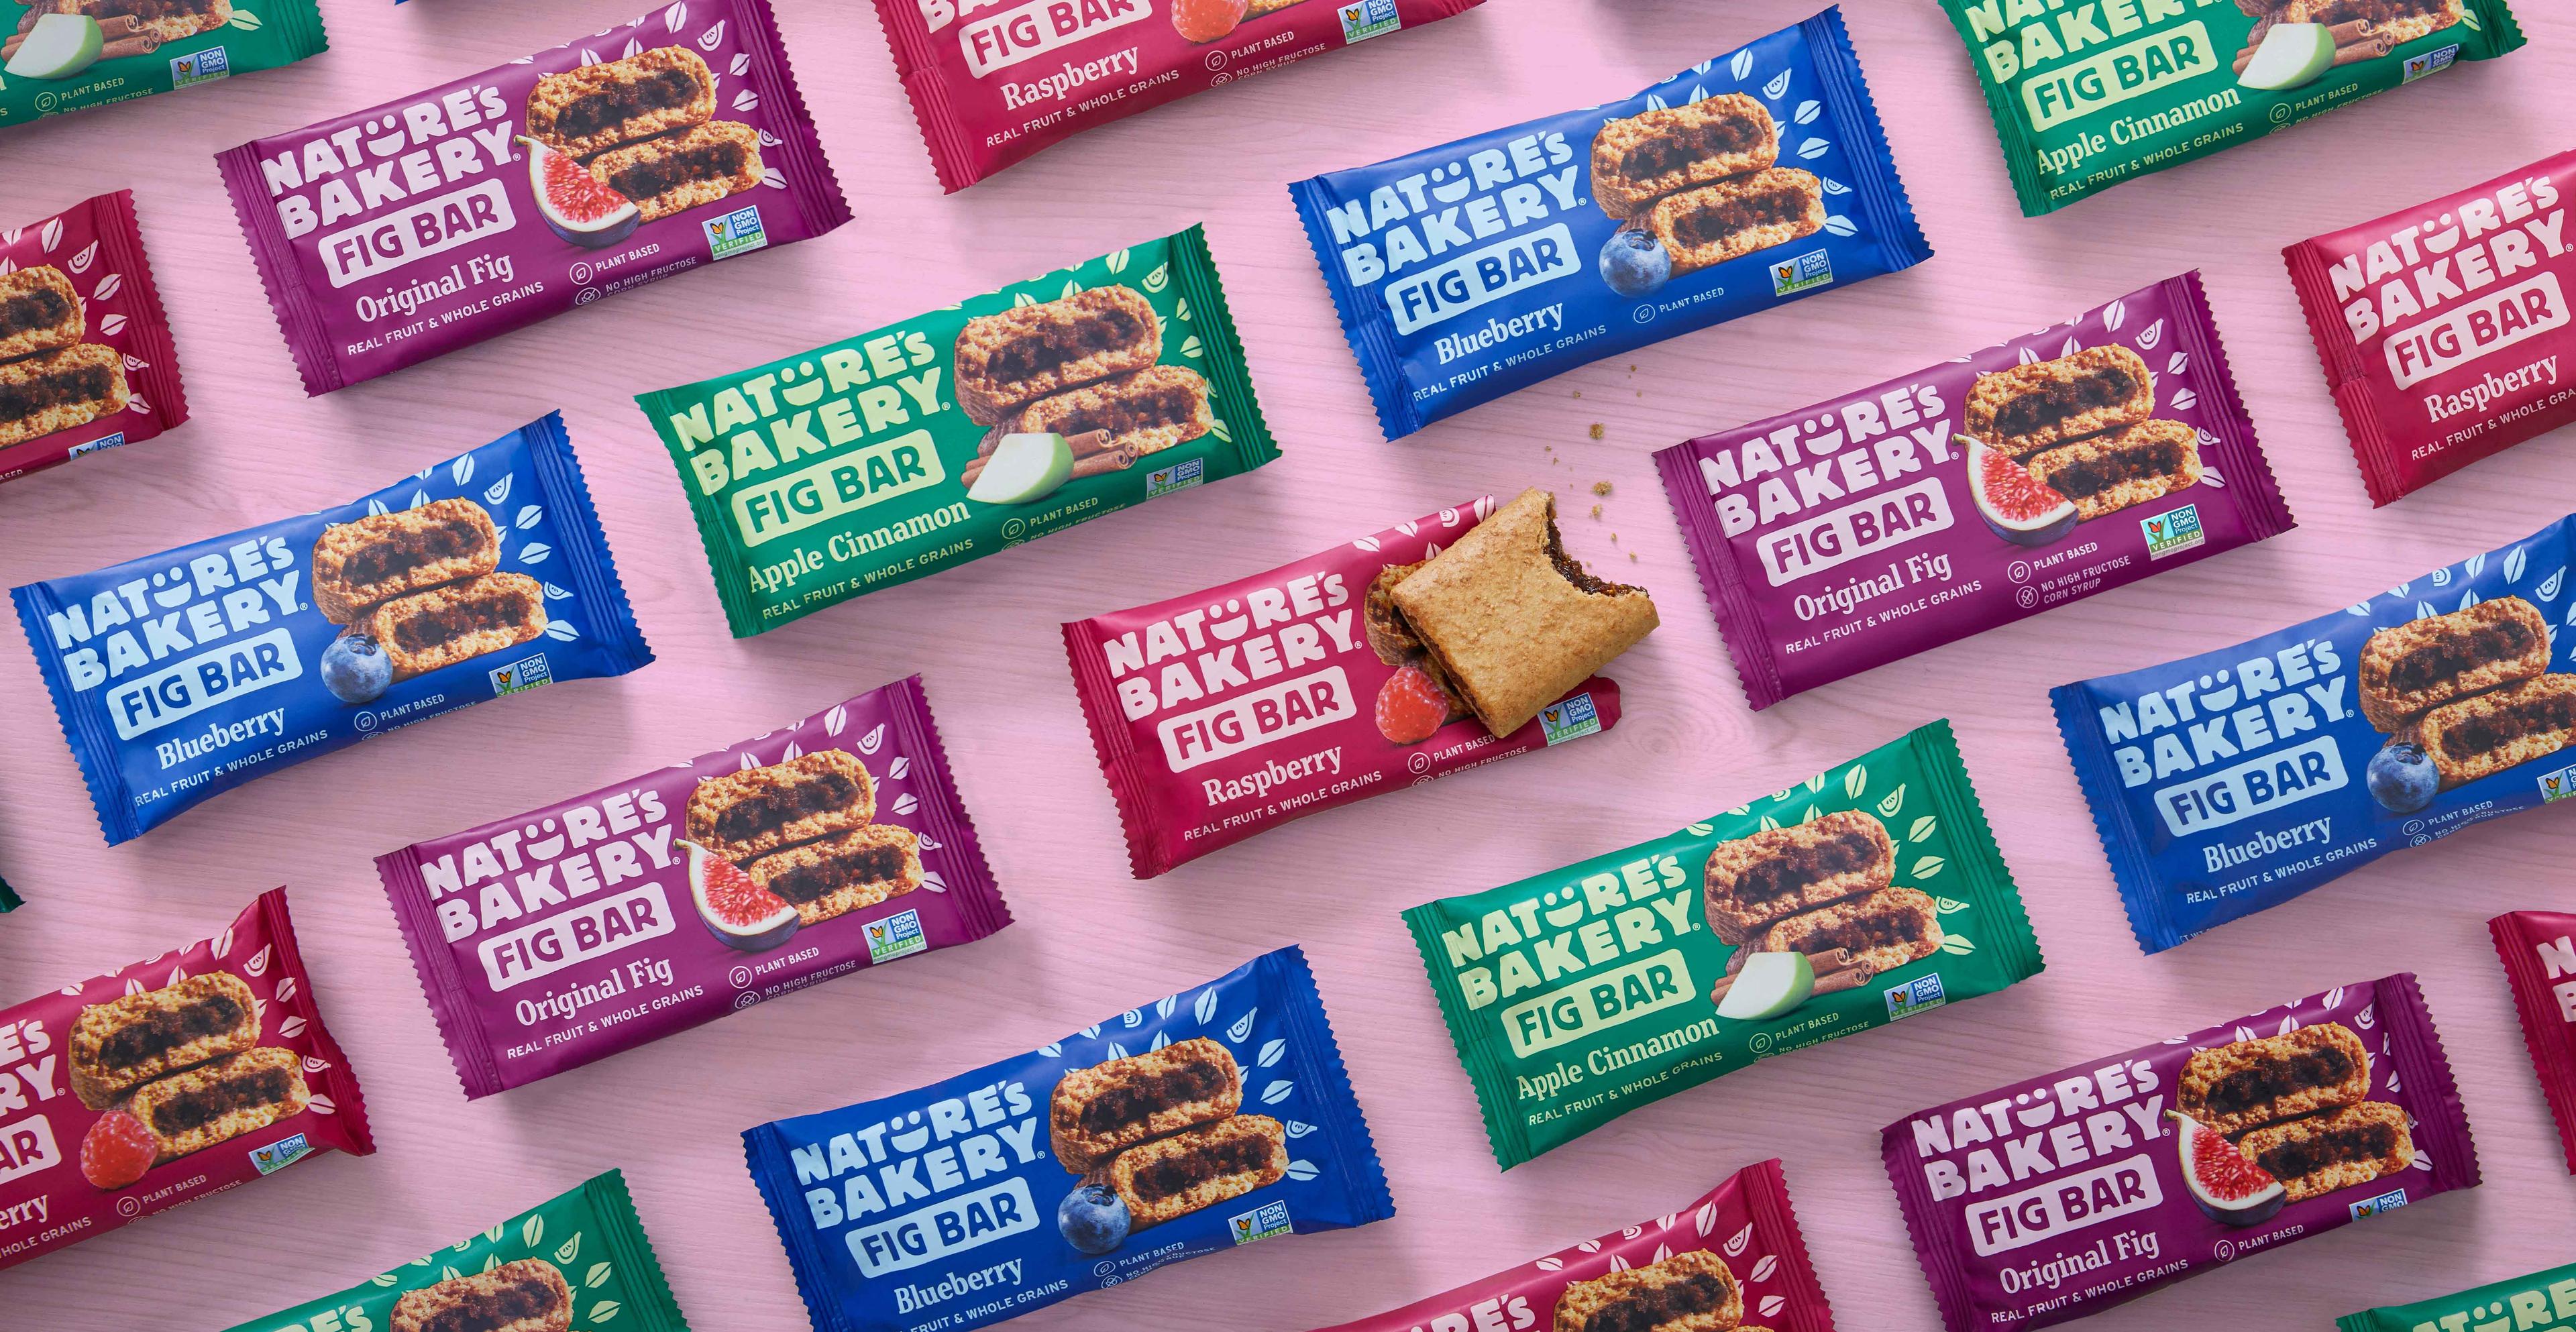 An assortment of Nature's Bakery fig bars on a pink background